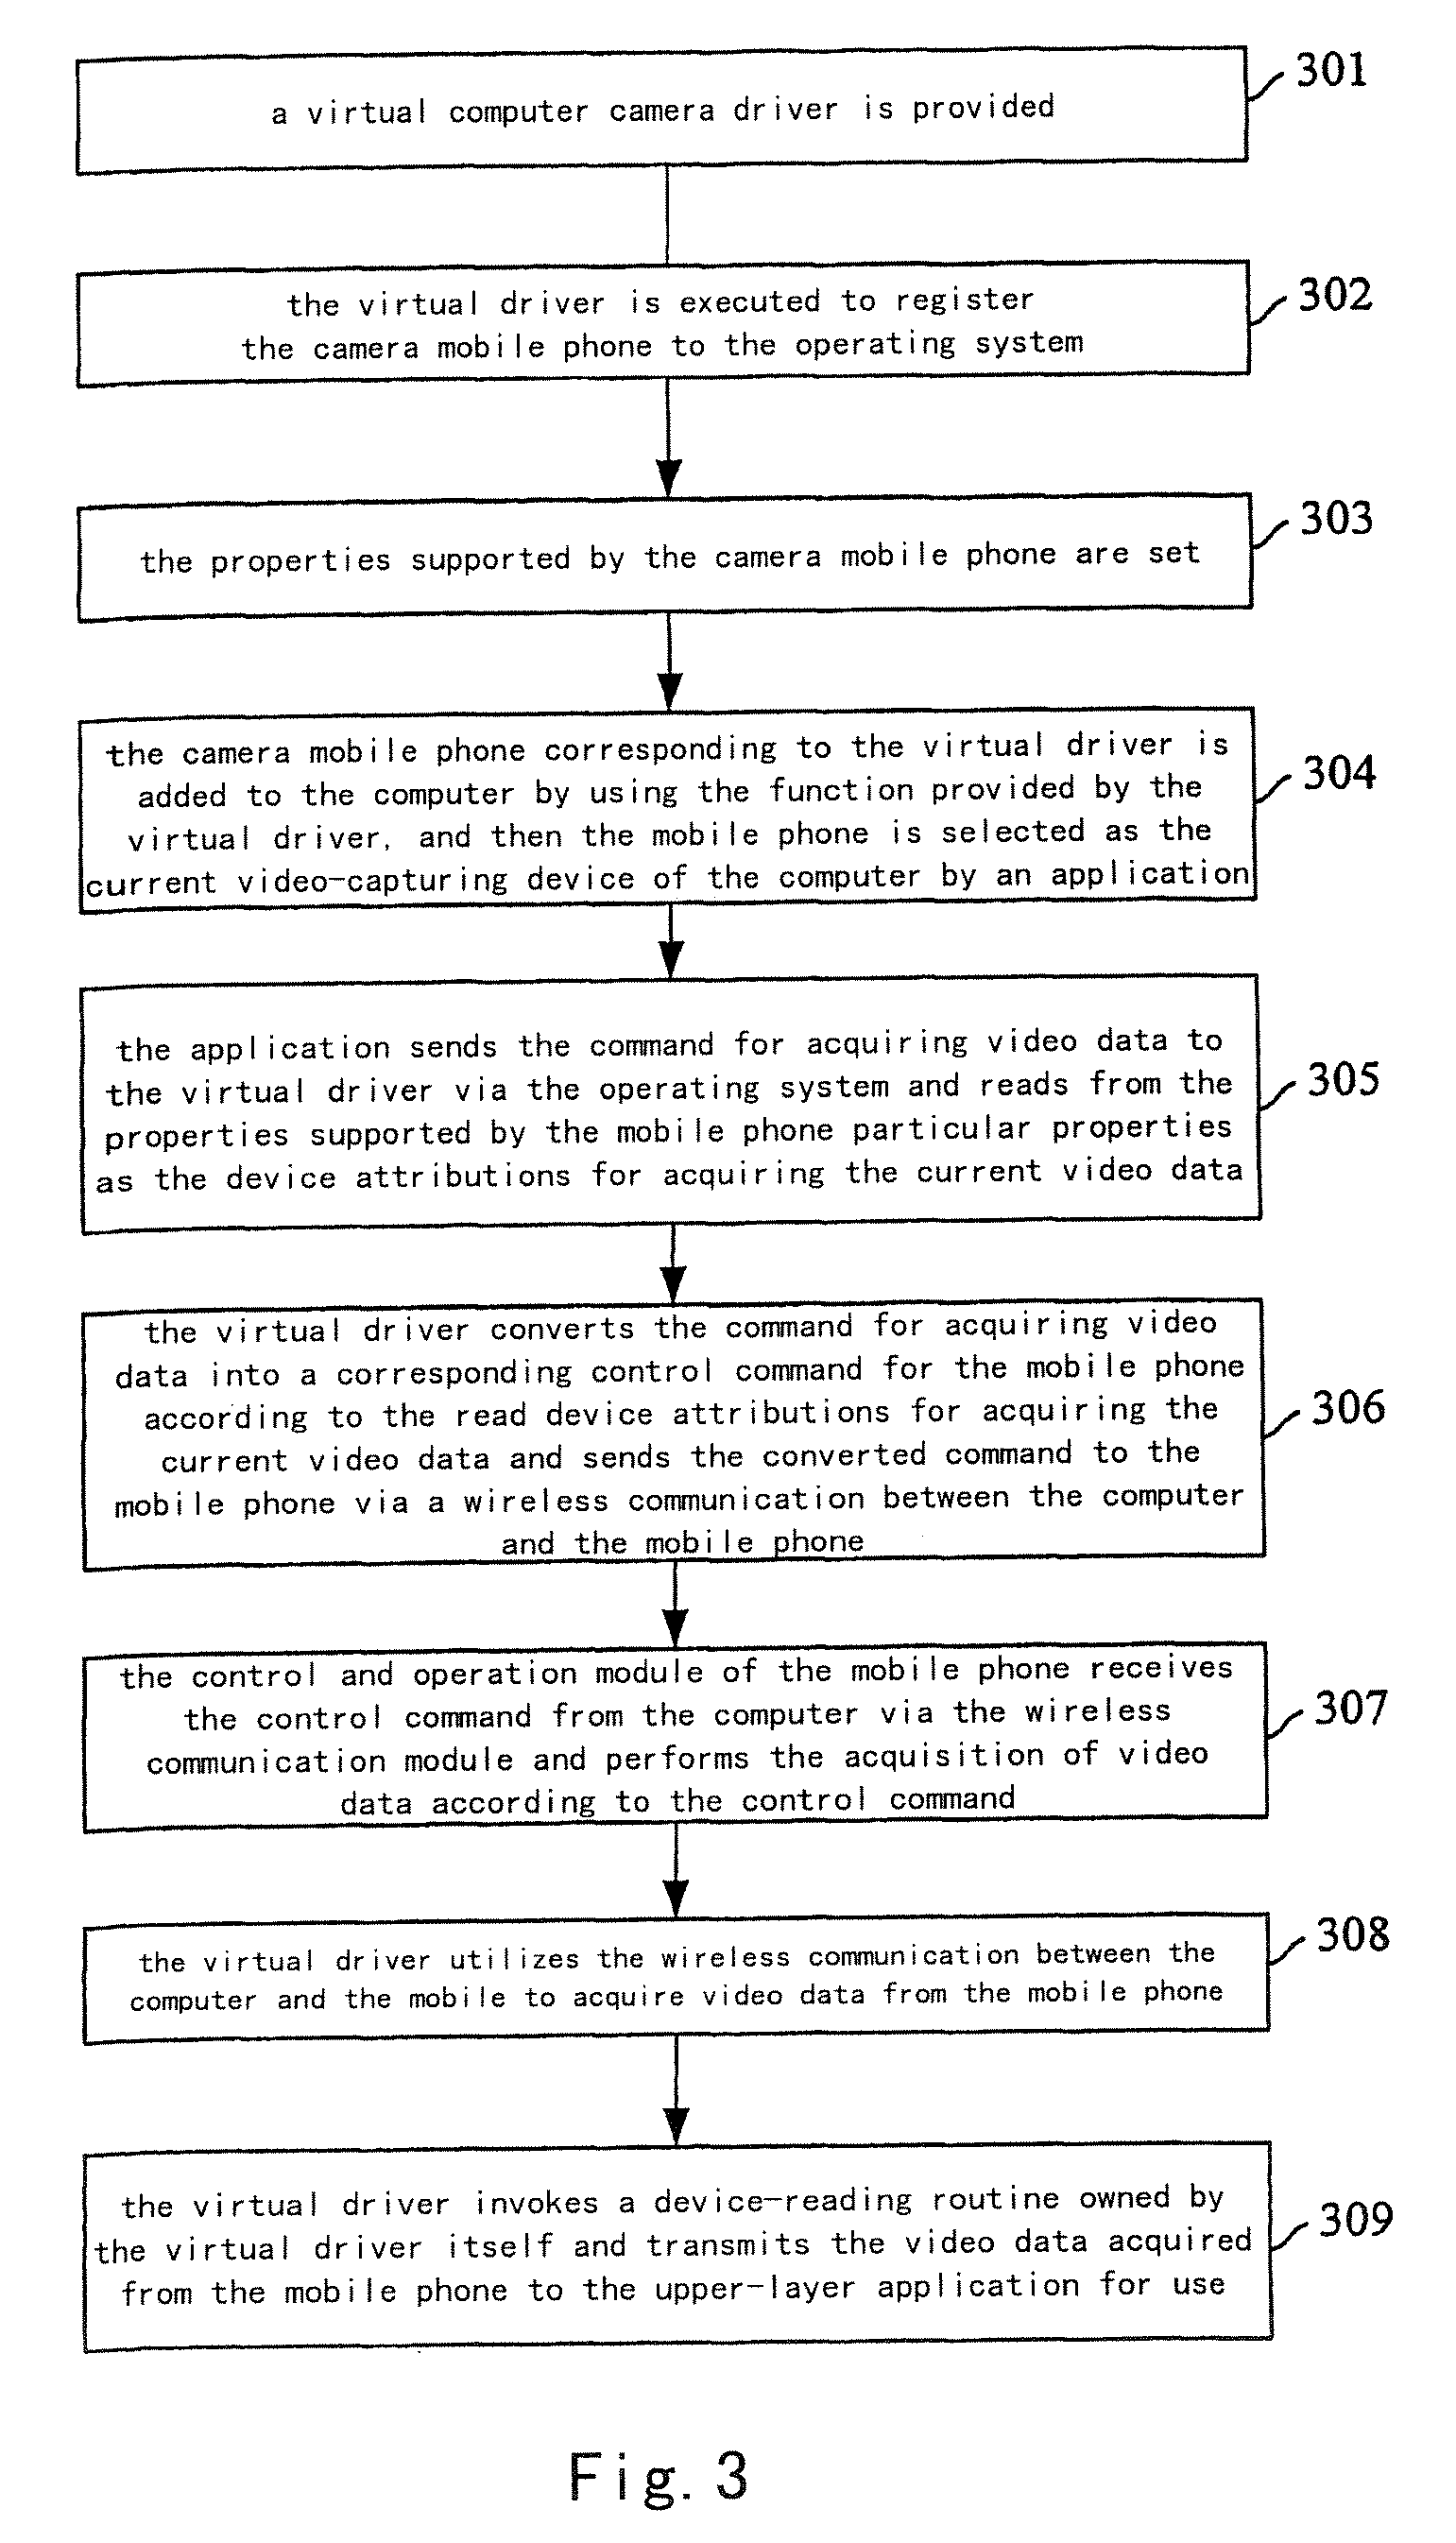 Method for Acquiring Video Data by Using Camera Mobile Phone as Computer Camera